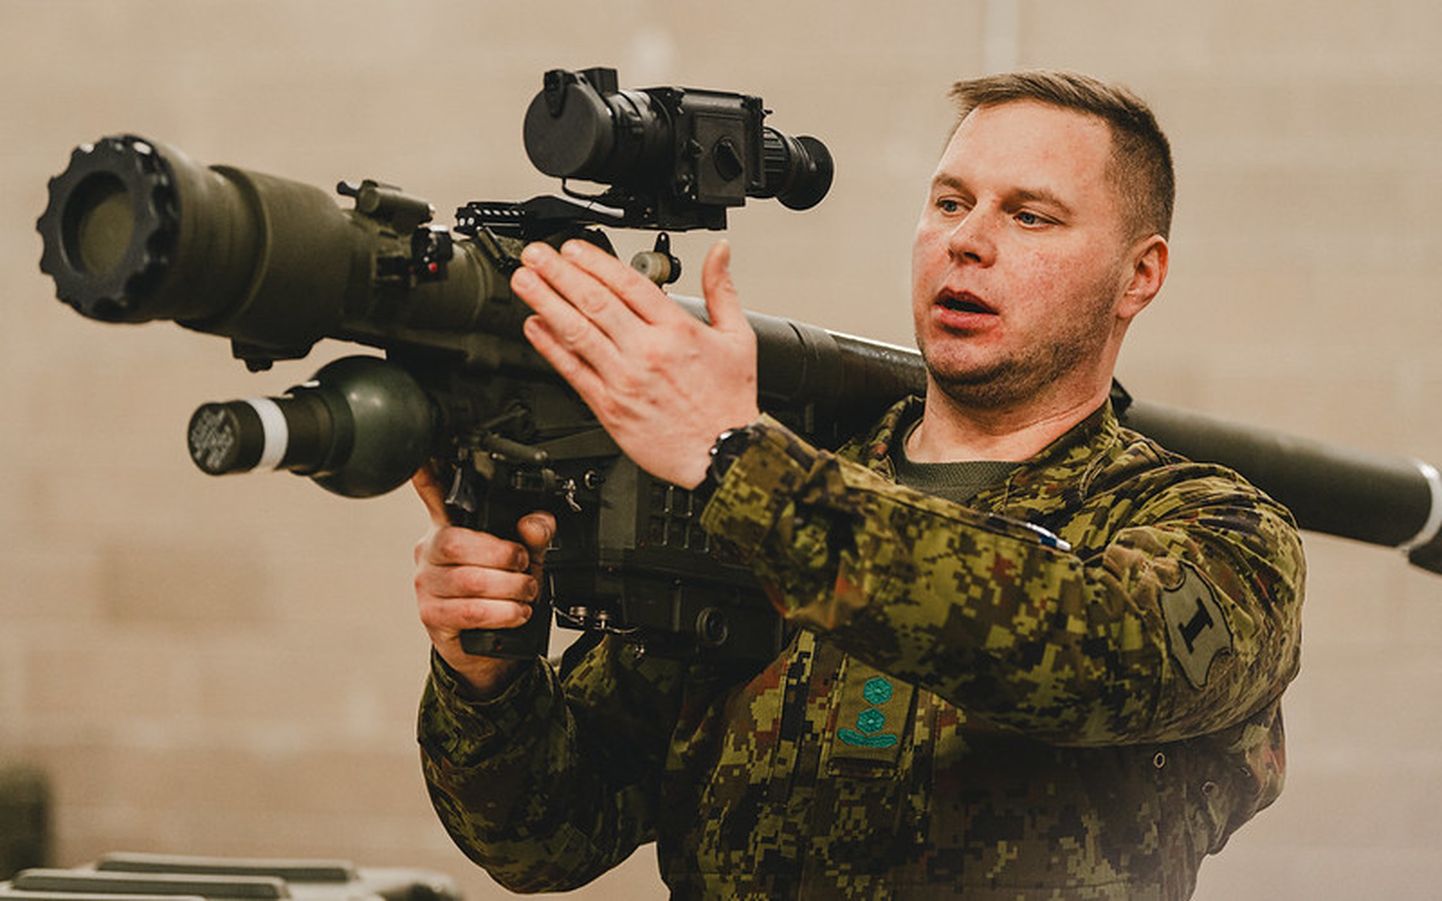 Lieutenant Colonel Tanel Lelov, commander of the air defense department of the Estonian division, with the PIORUN short-range air defense system.